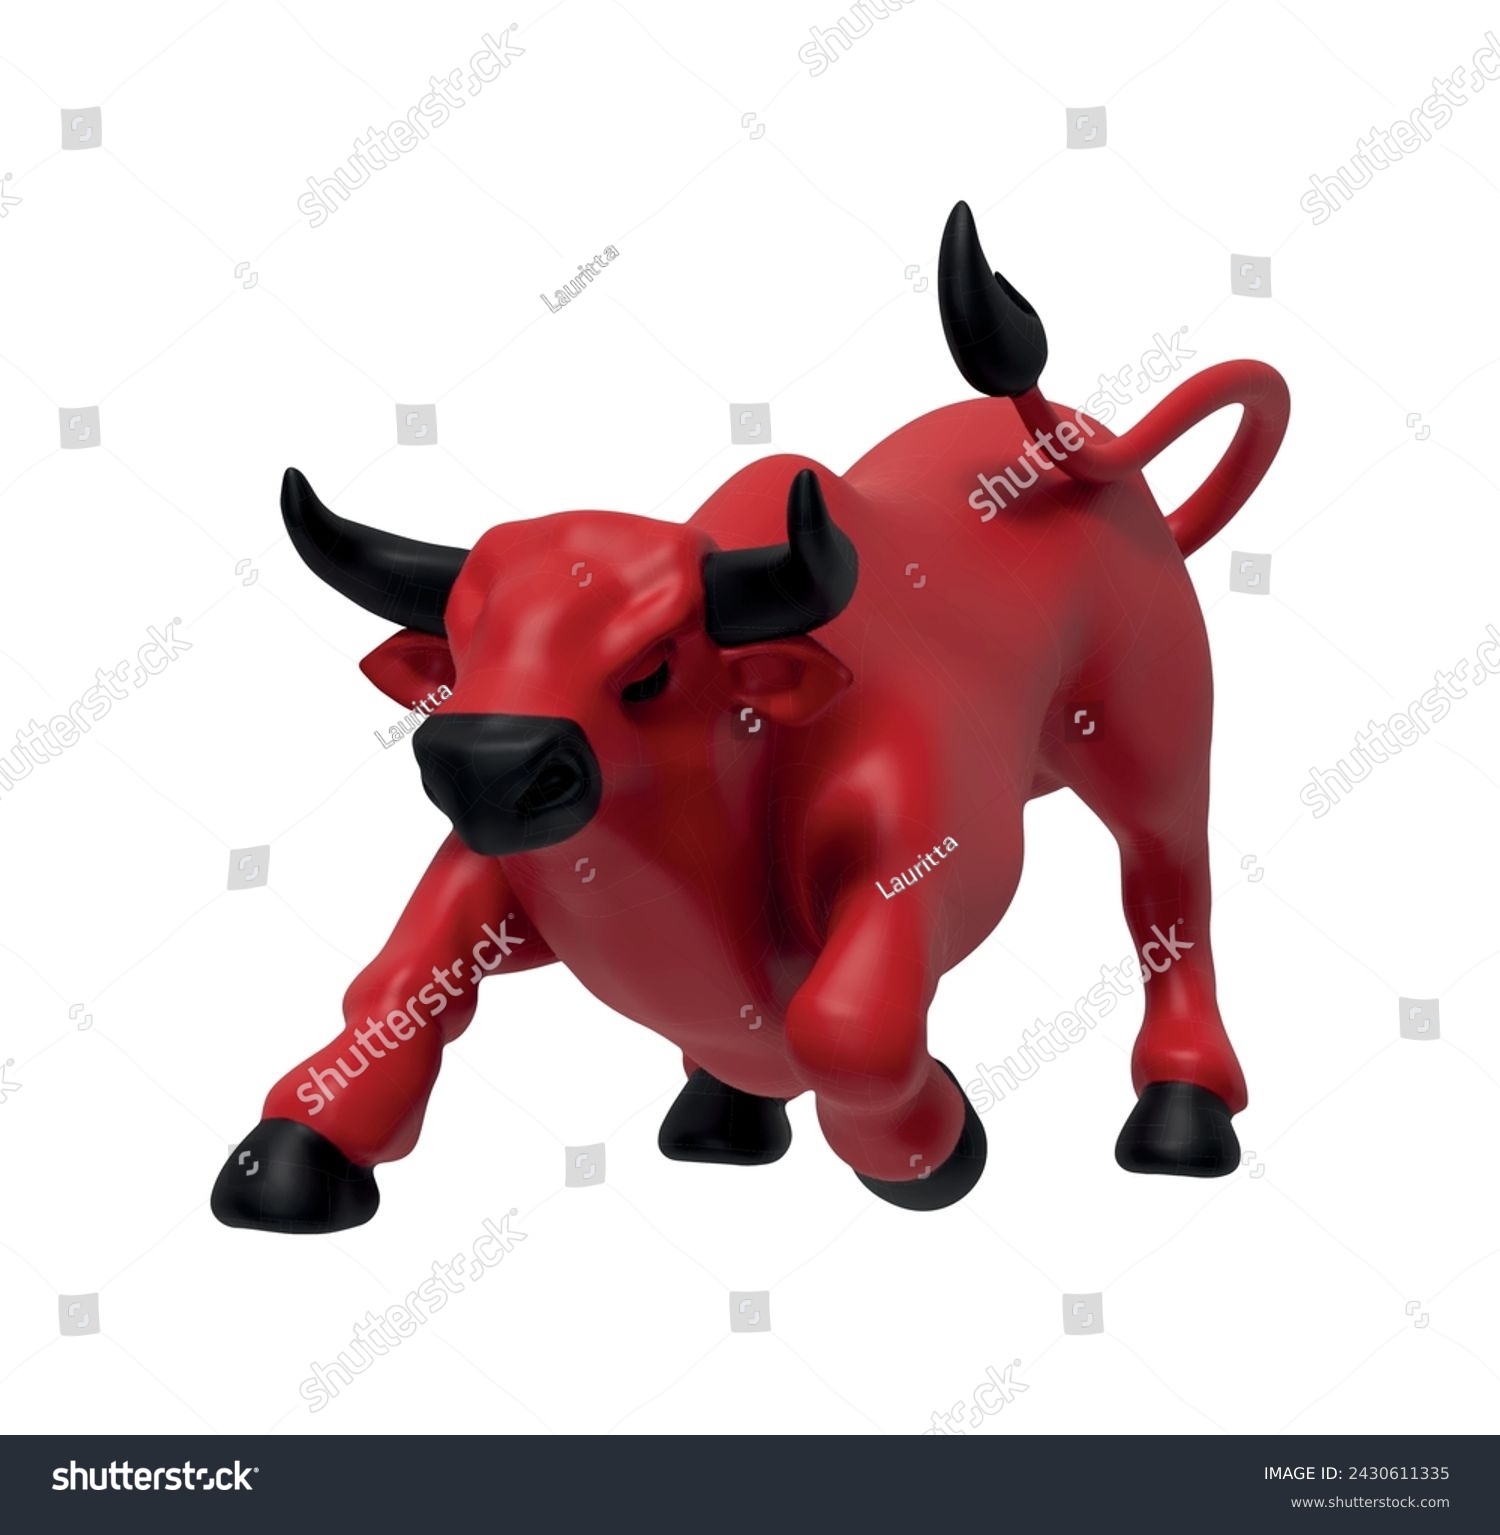 SVG of Red Bull realistic 3d cartoon style. Bull isolated on white background. Vector illustration svg